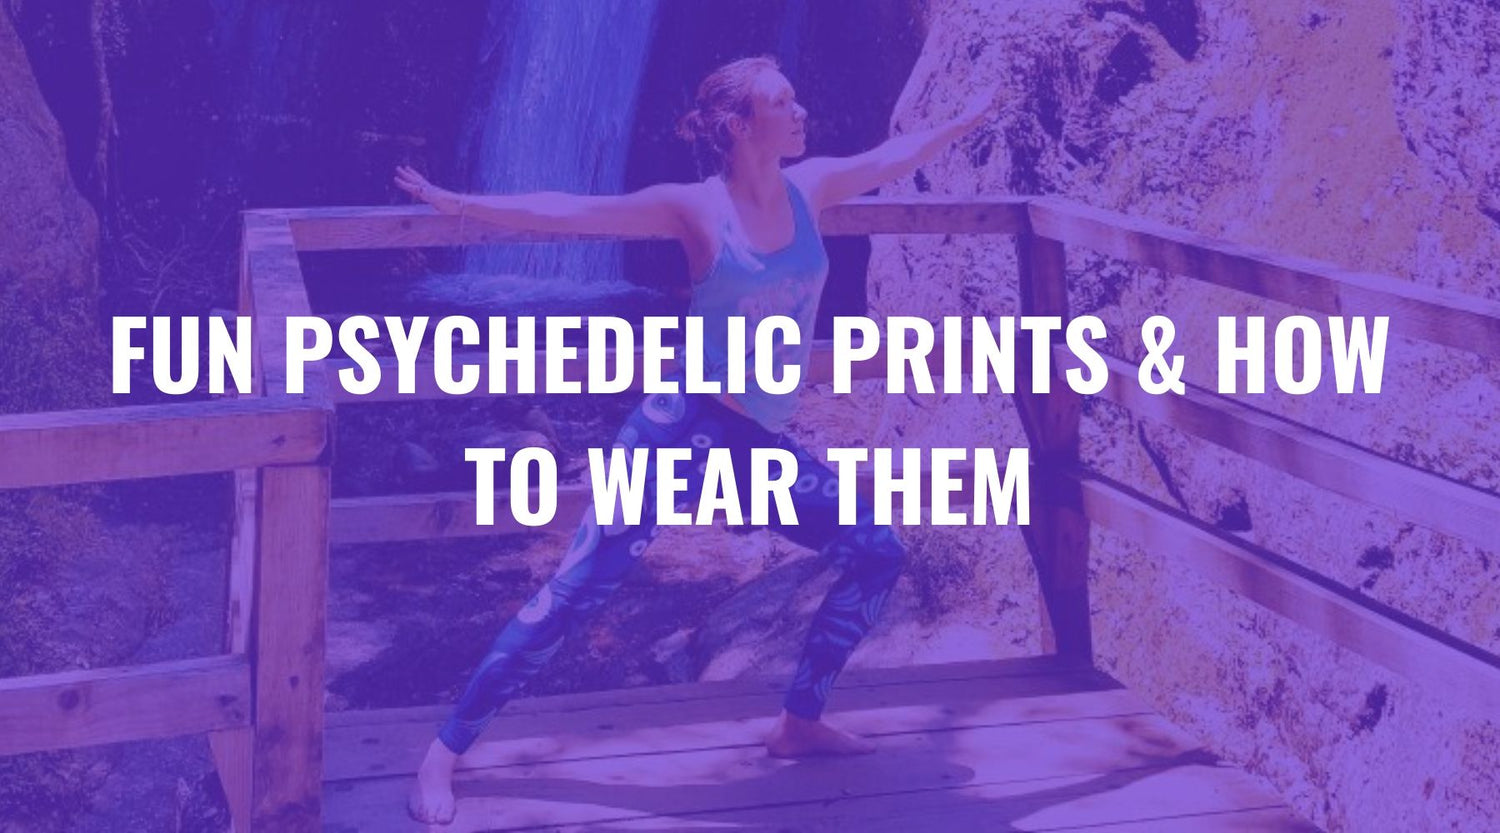 Fun Psychedelic Prints & How to Wear Them